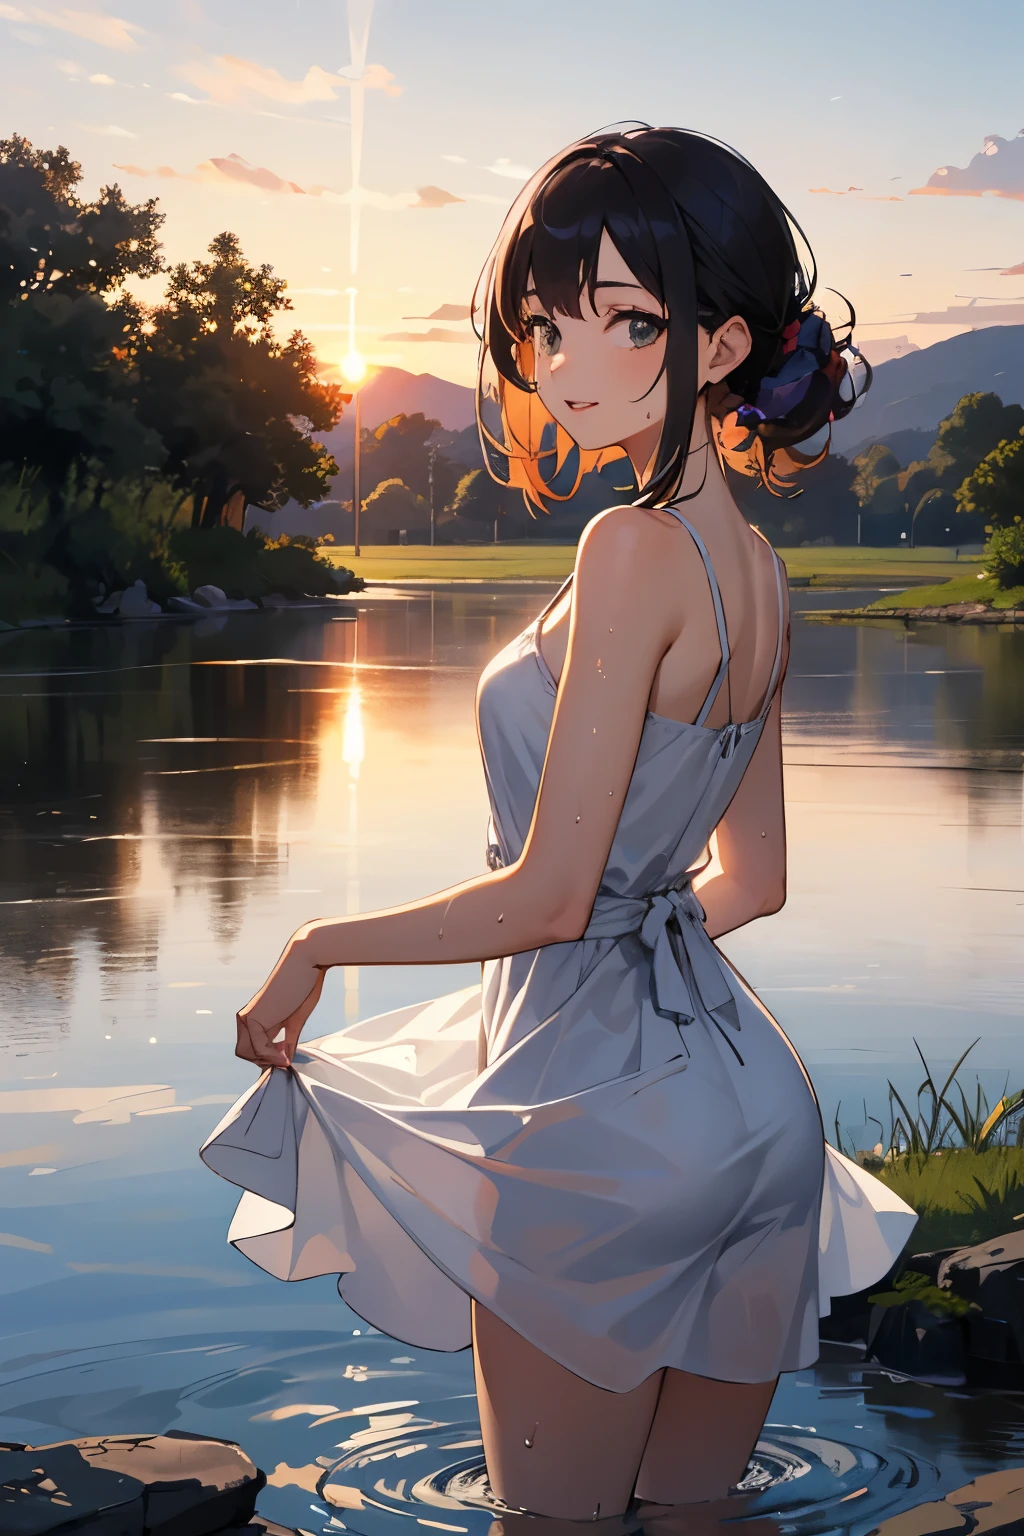 A girl wearing a white dress is bathing in the river, getting wet, having fun, no make-up, countryside scenery, sunset, turning around